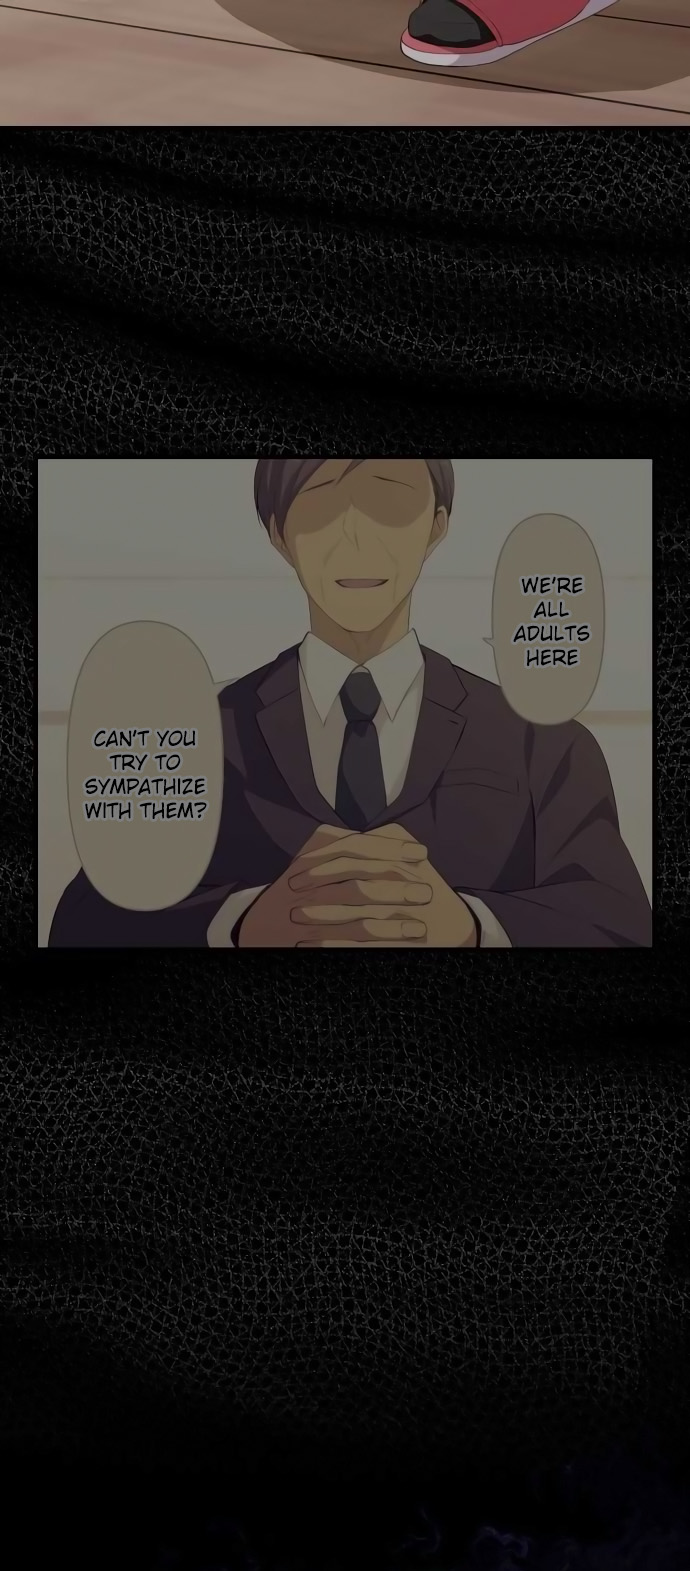 ReLIFE Ch.138